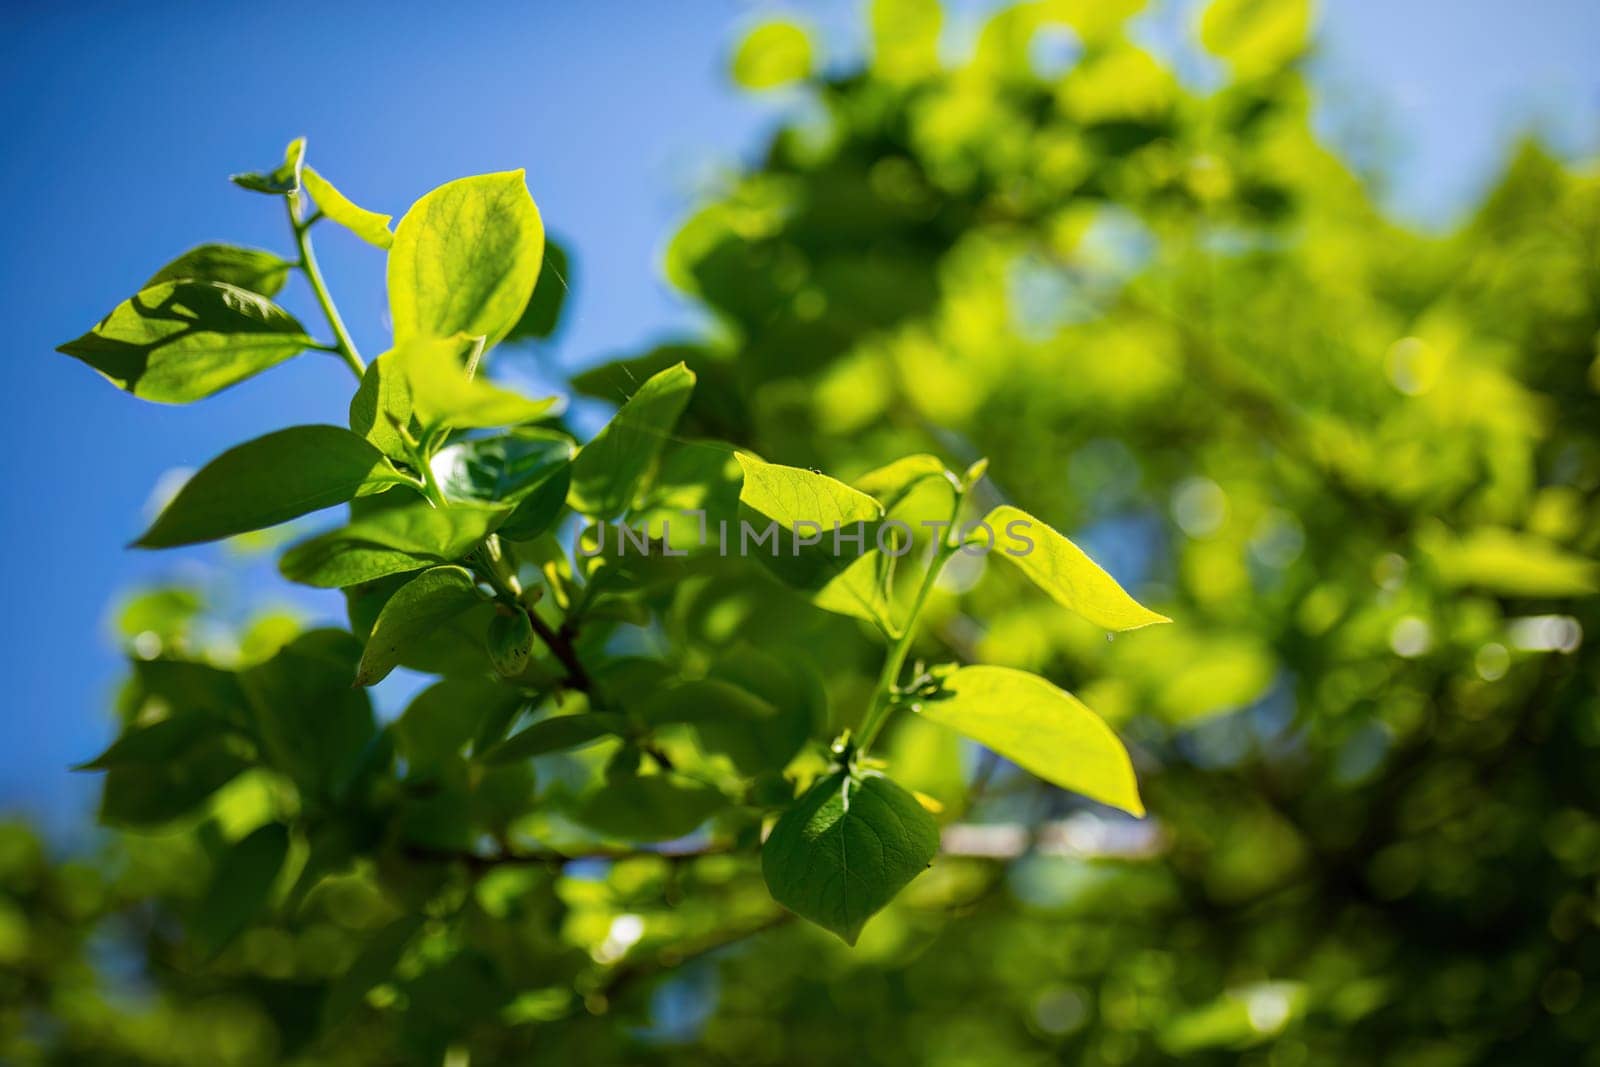 A green leafy tree stands against a clear blue sky, showcasing natures beauty in its simplest form.